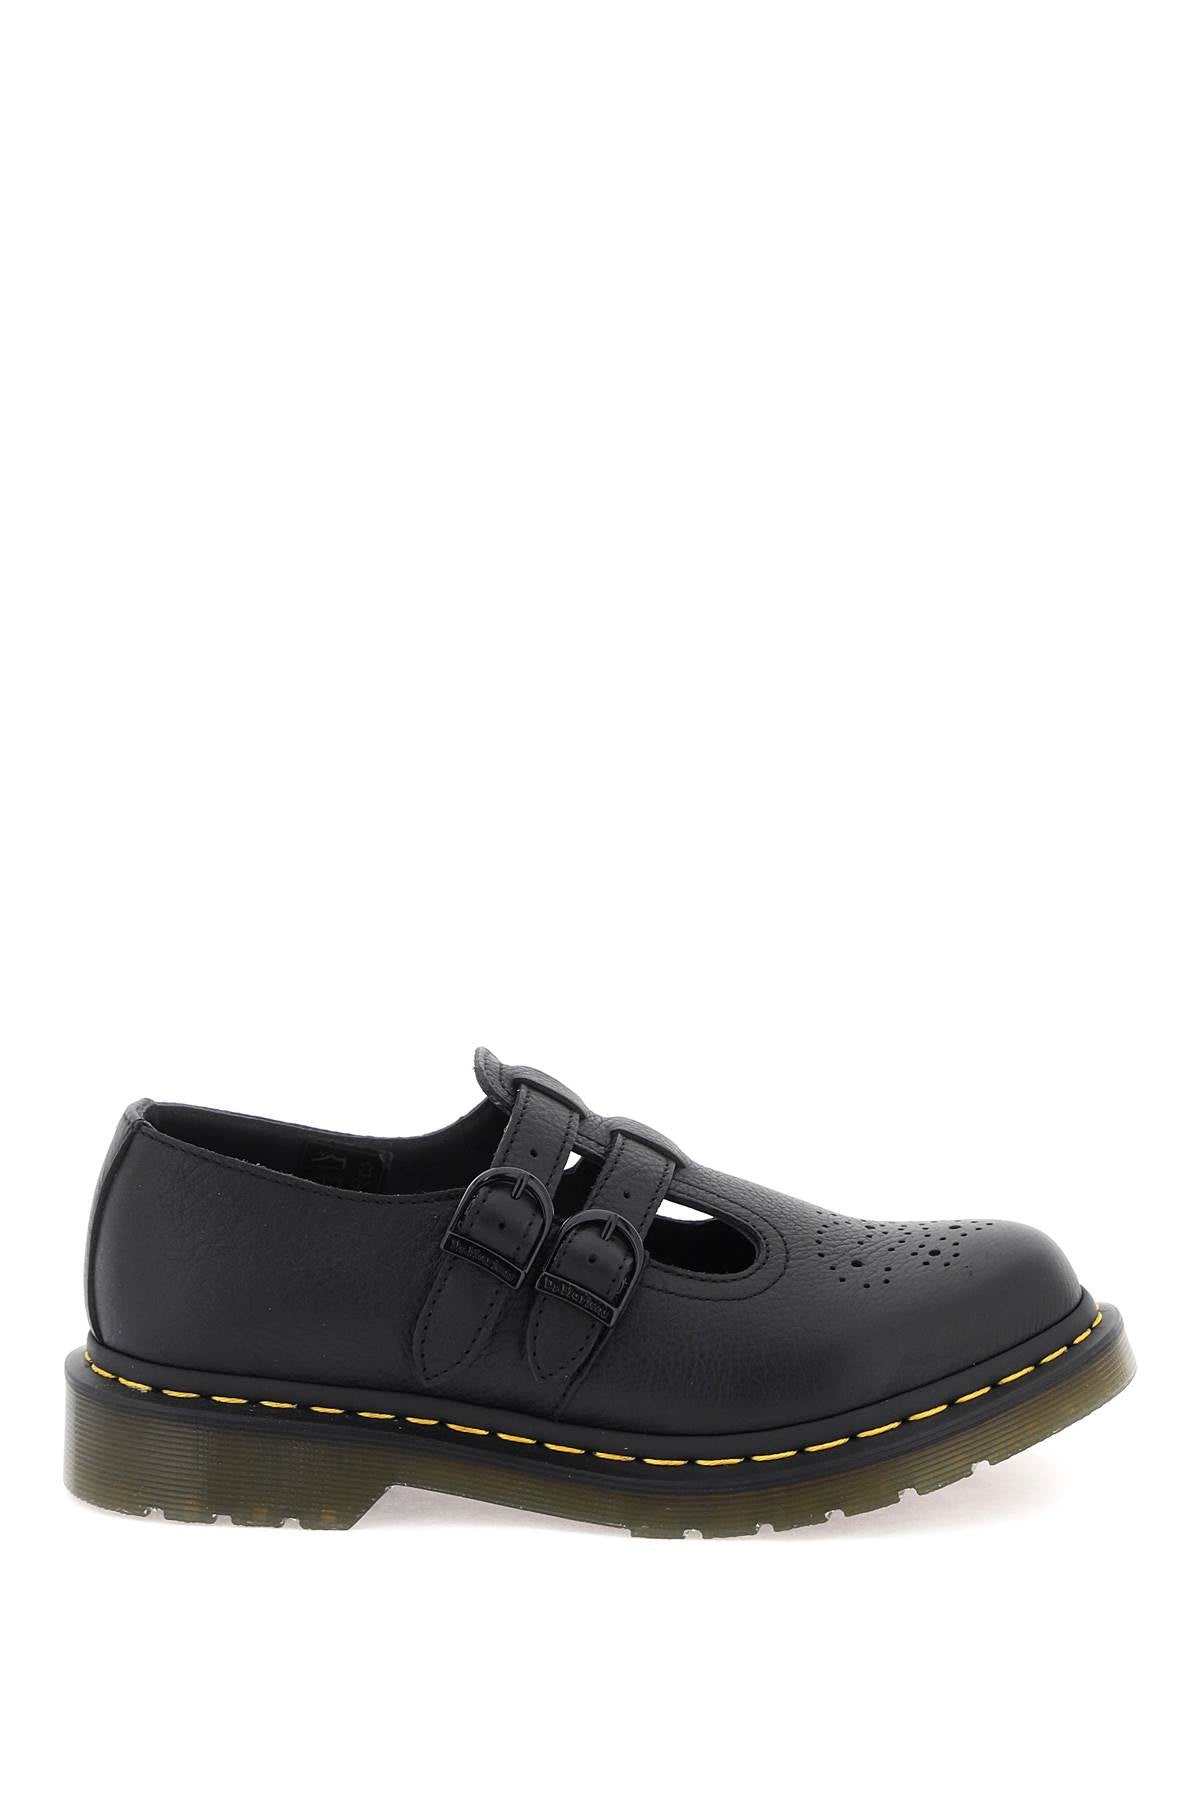 Dr.martens "leather virginia mary jane shoes-0